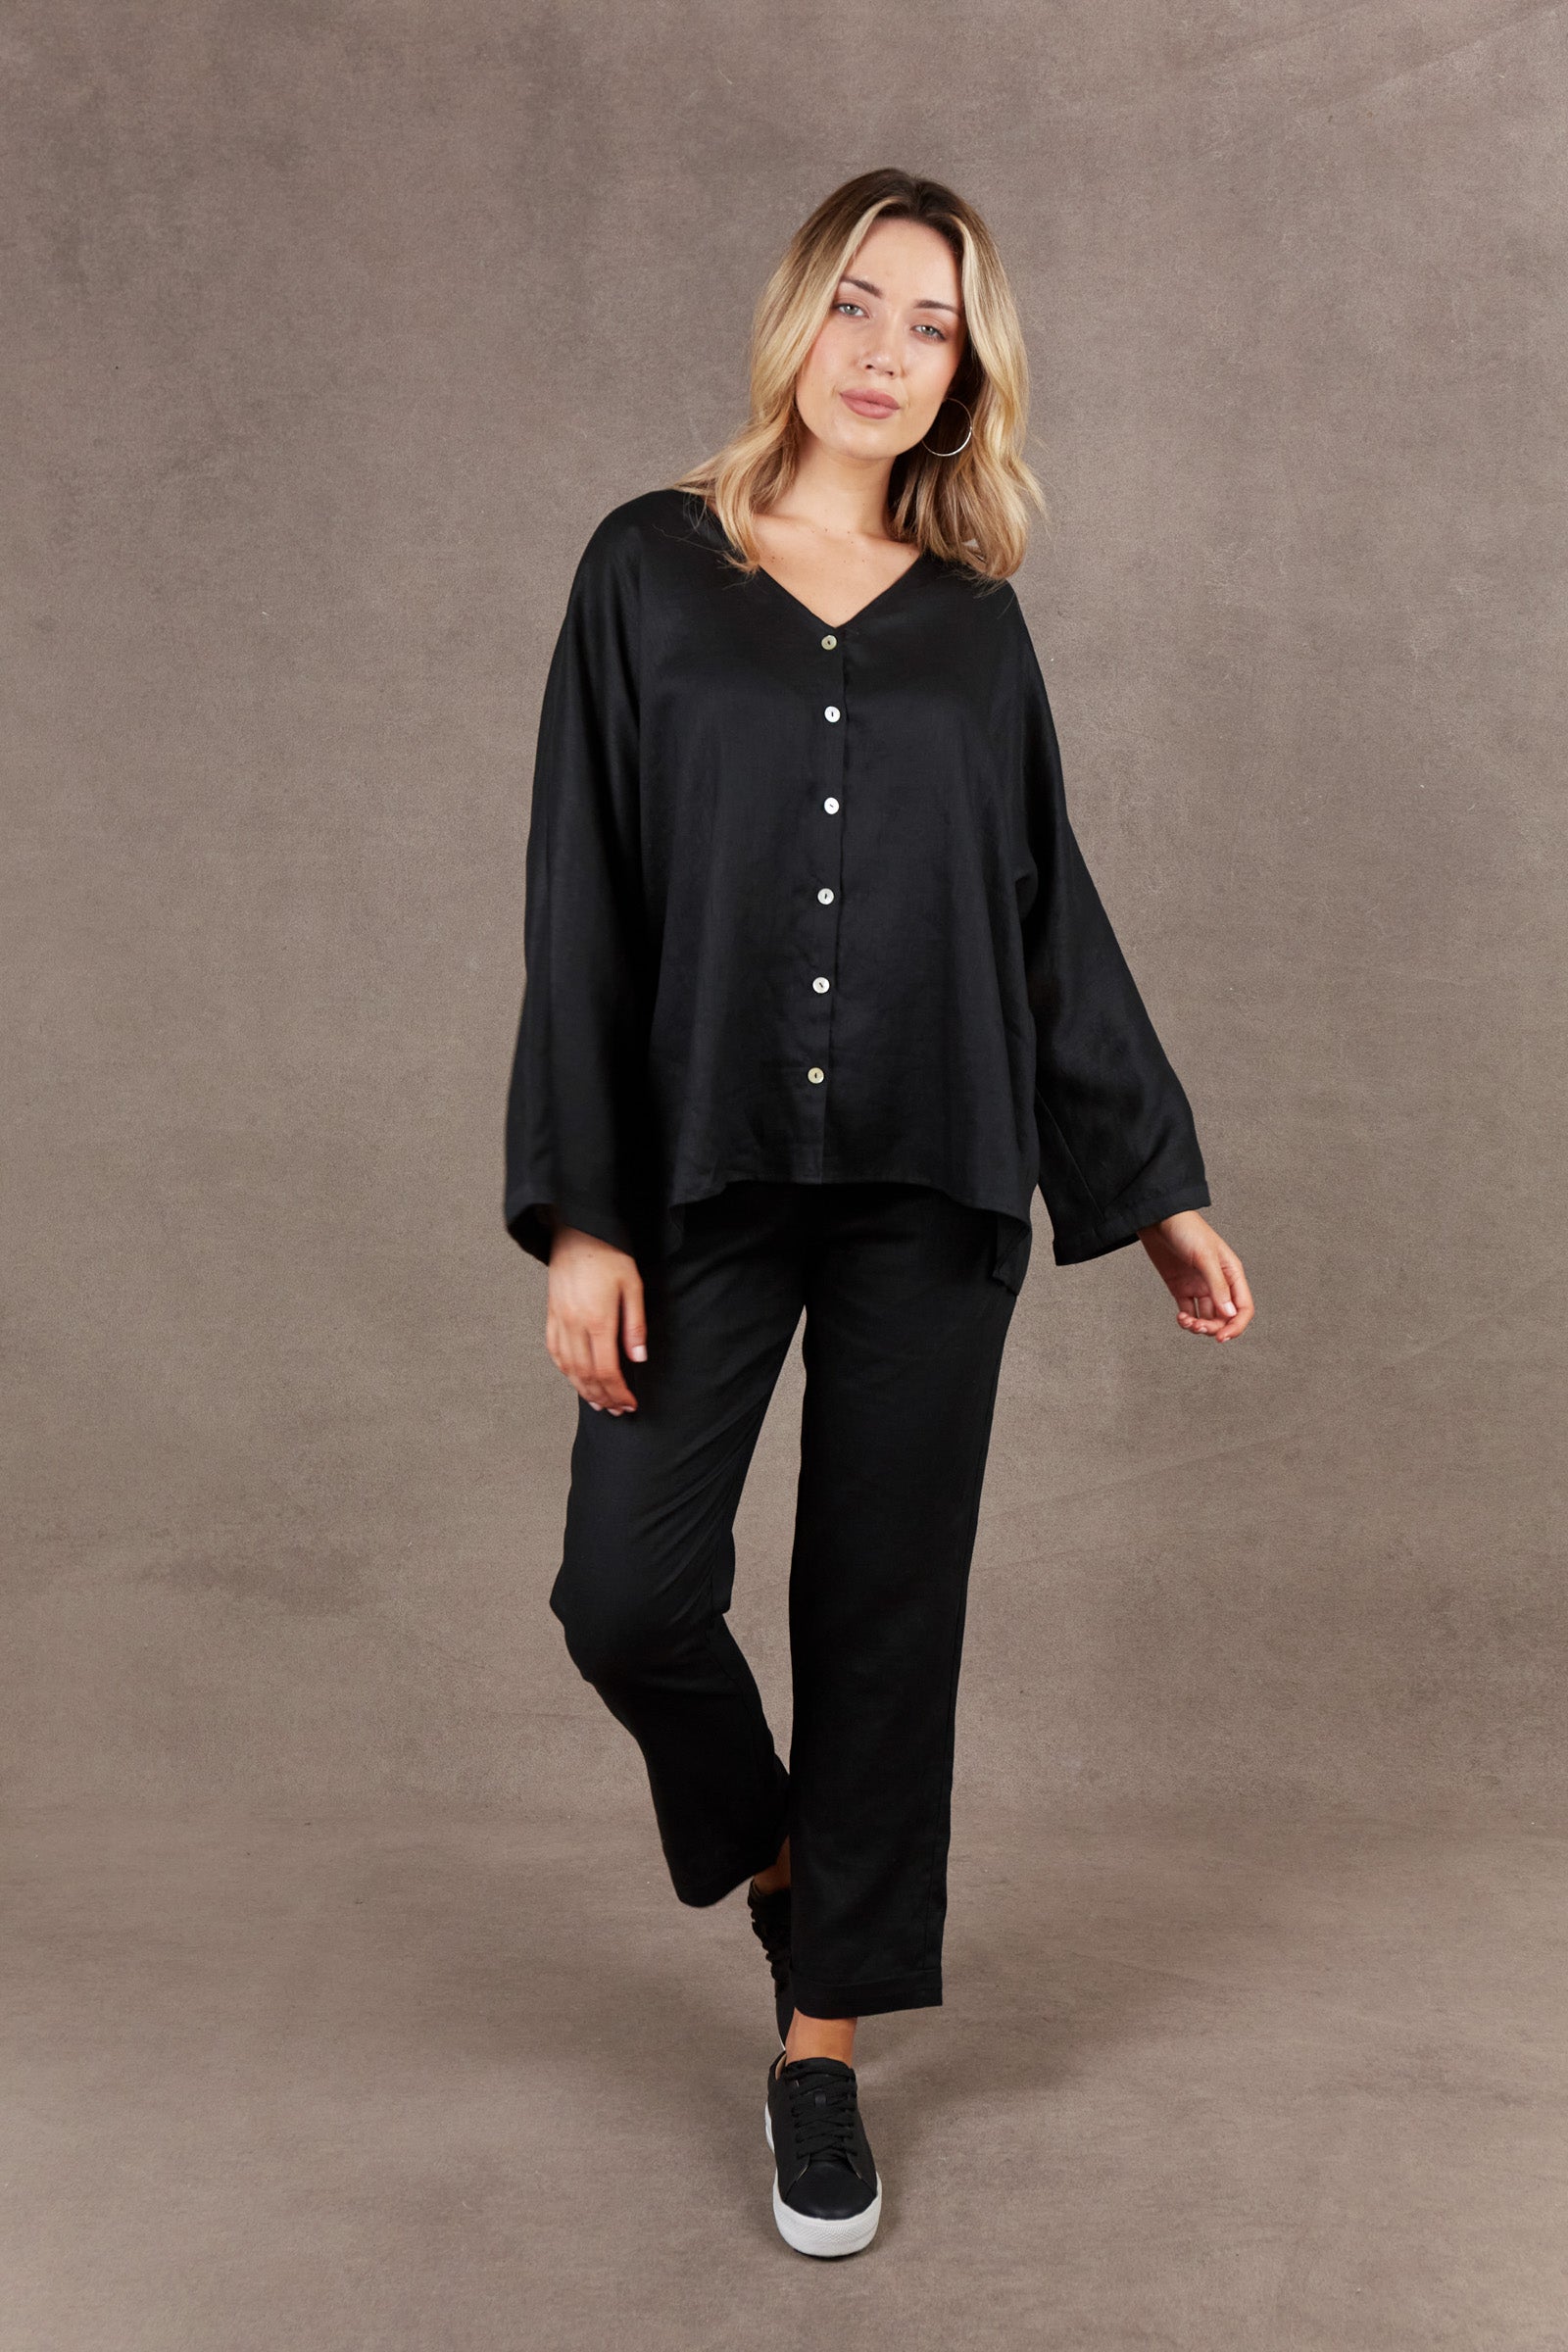 Nama Relax Top - Ebony - eb&ive Clothing - Top L/S Linen One Size